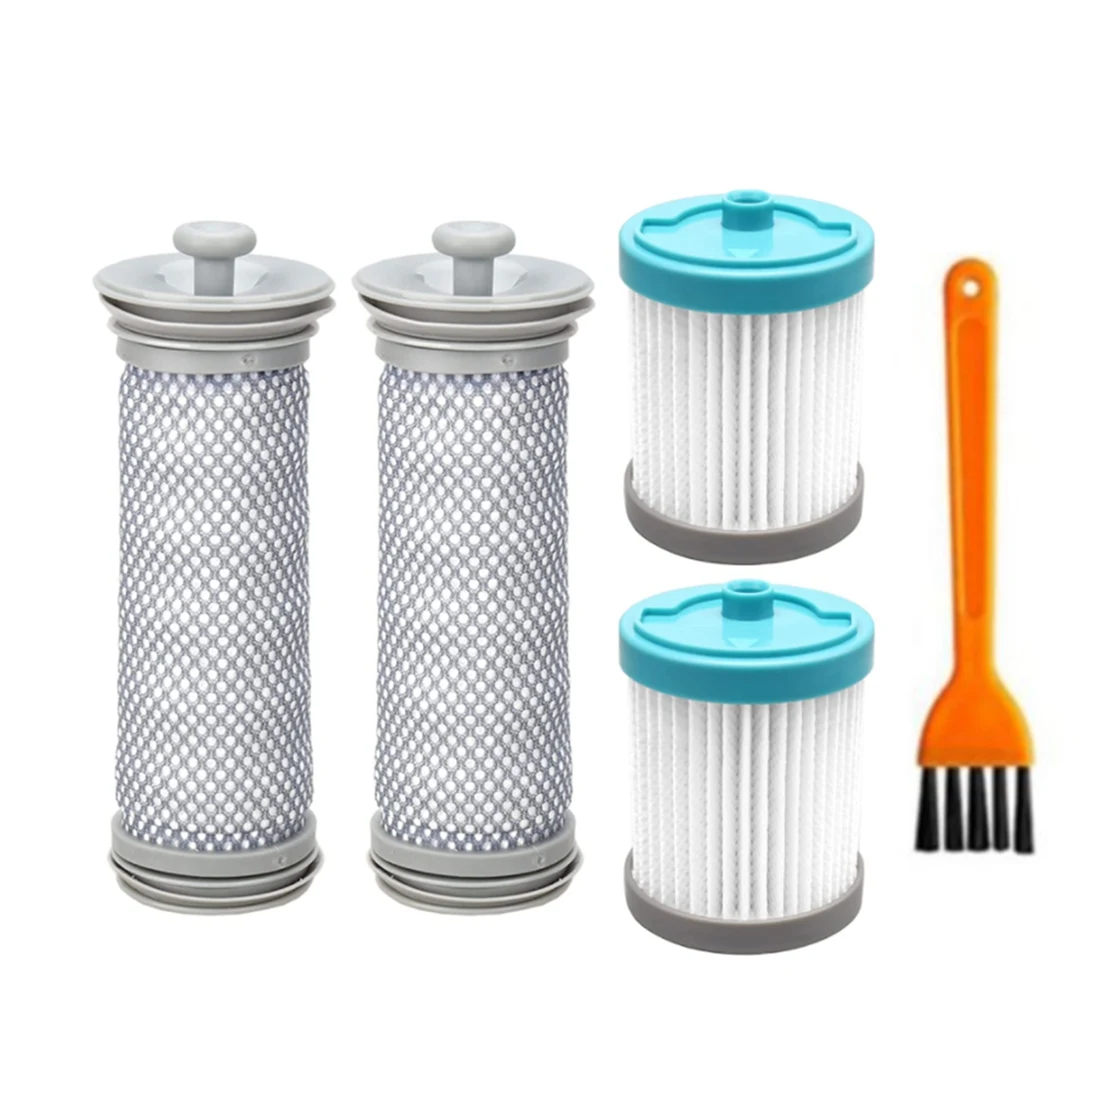 

Replacement Pre Filters& Post Filters for Tineco A10/A11 Hero A10/A11 Master and Tineco PURE ONE S11/S12 Vacuum Cleaners